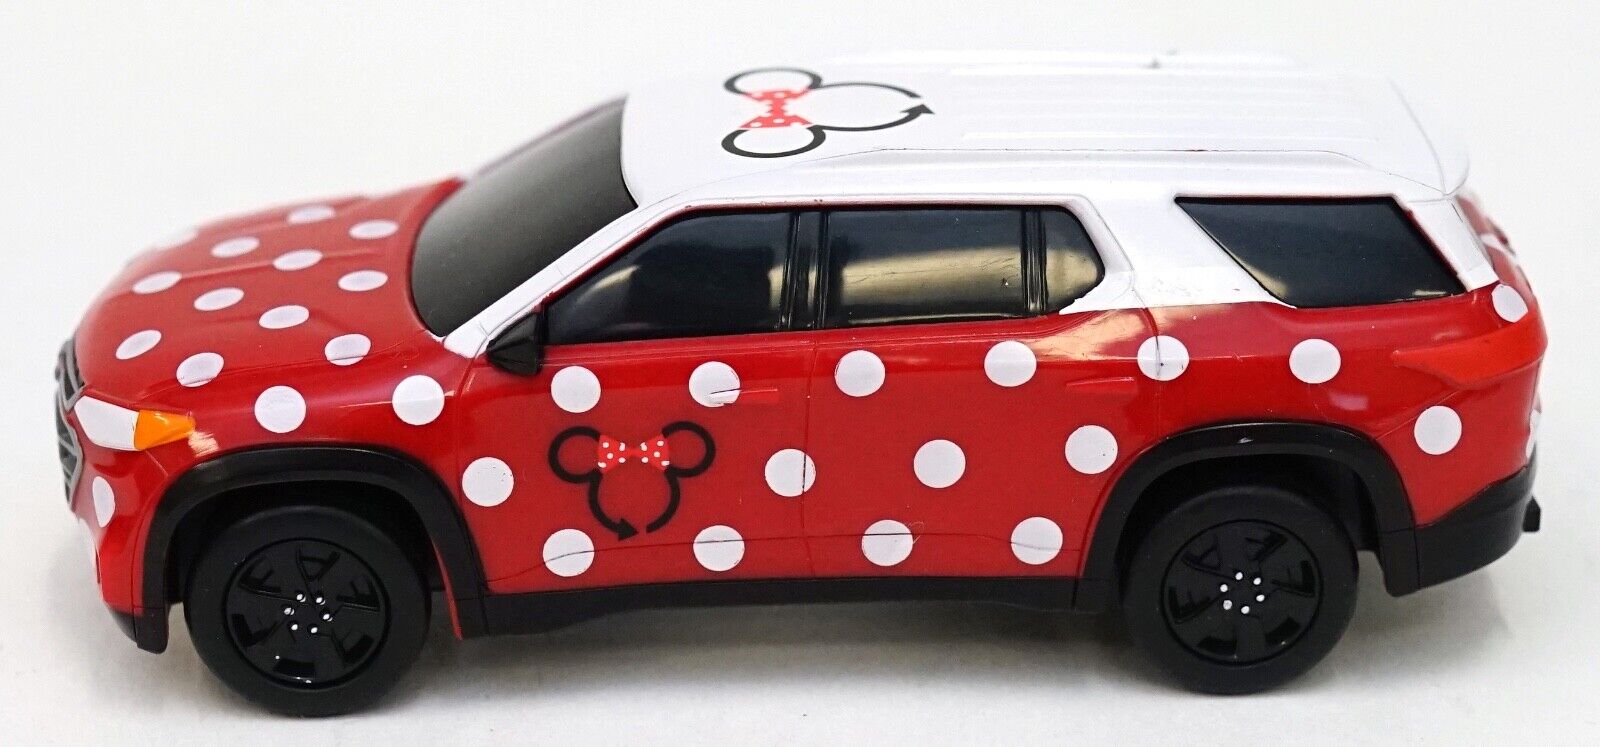 New Disney Parks GM Official Product Red Polka Dot Minnie Van Toy Car